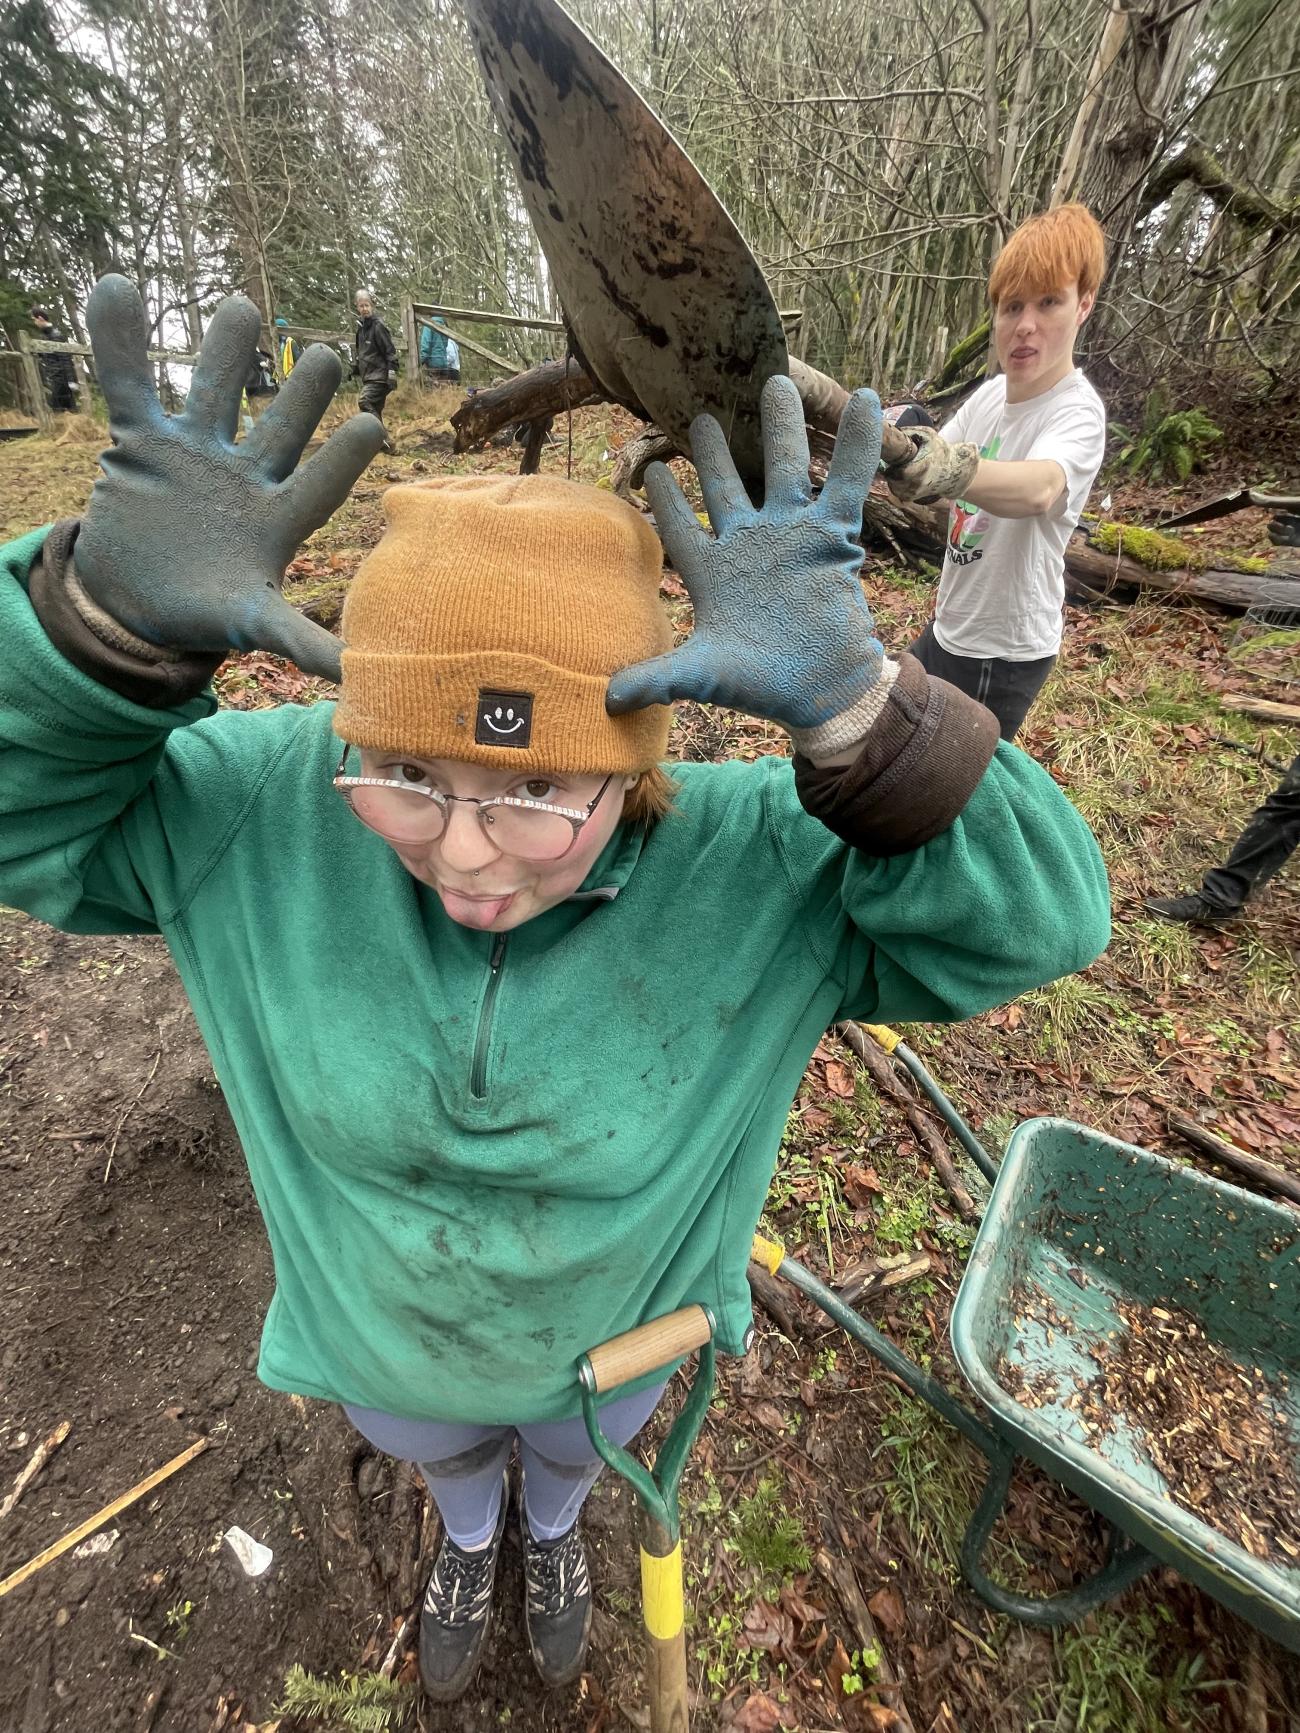 person with hands spread, thumbs next to ears, sticking their tongue out, while someone behind them holds a shovel over the person's head